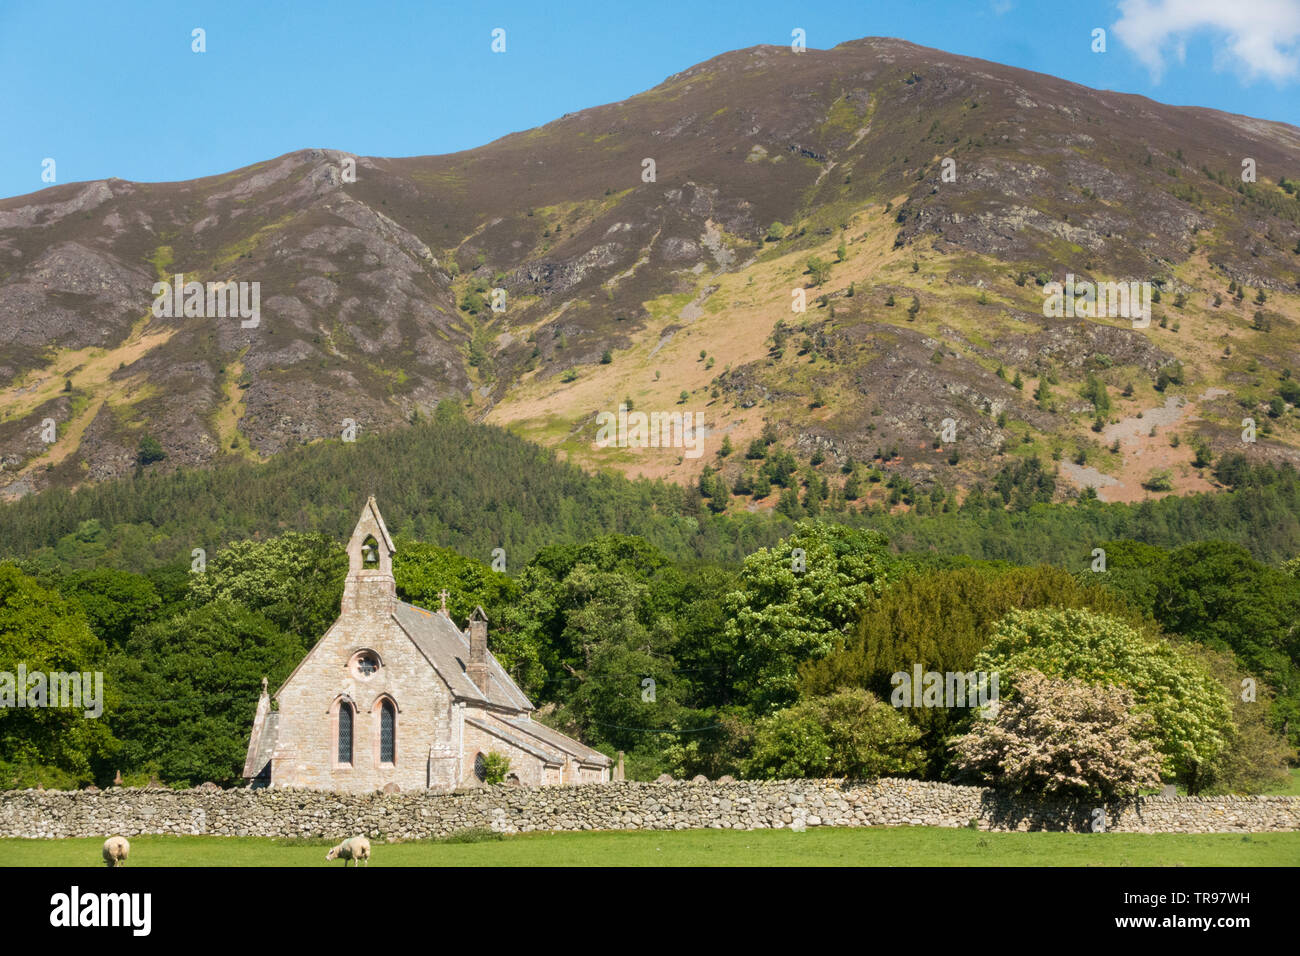 St Bega's Chapel on the shores of Bassenthwite Lake with Skiddaw in the background (part10th/11th century).  UK Lake district. Stock Photo